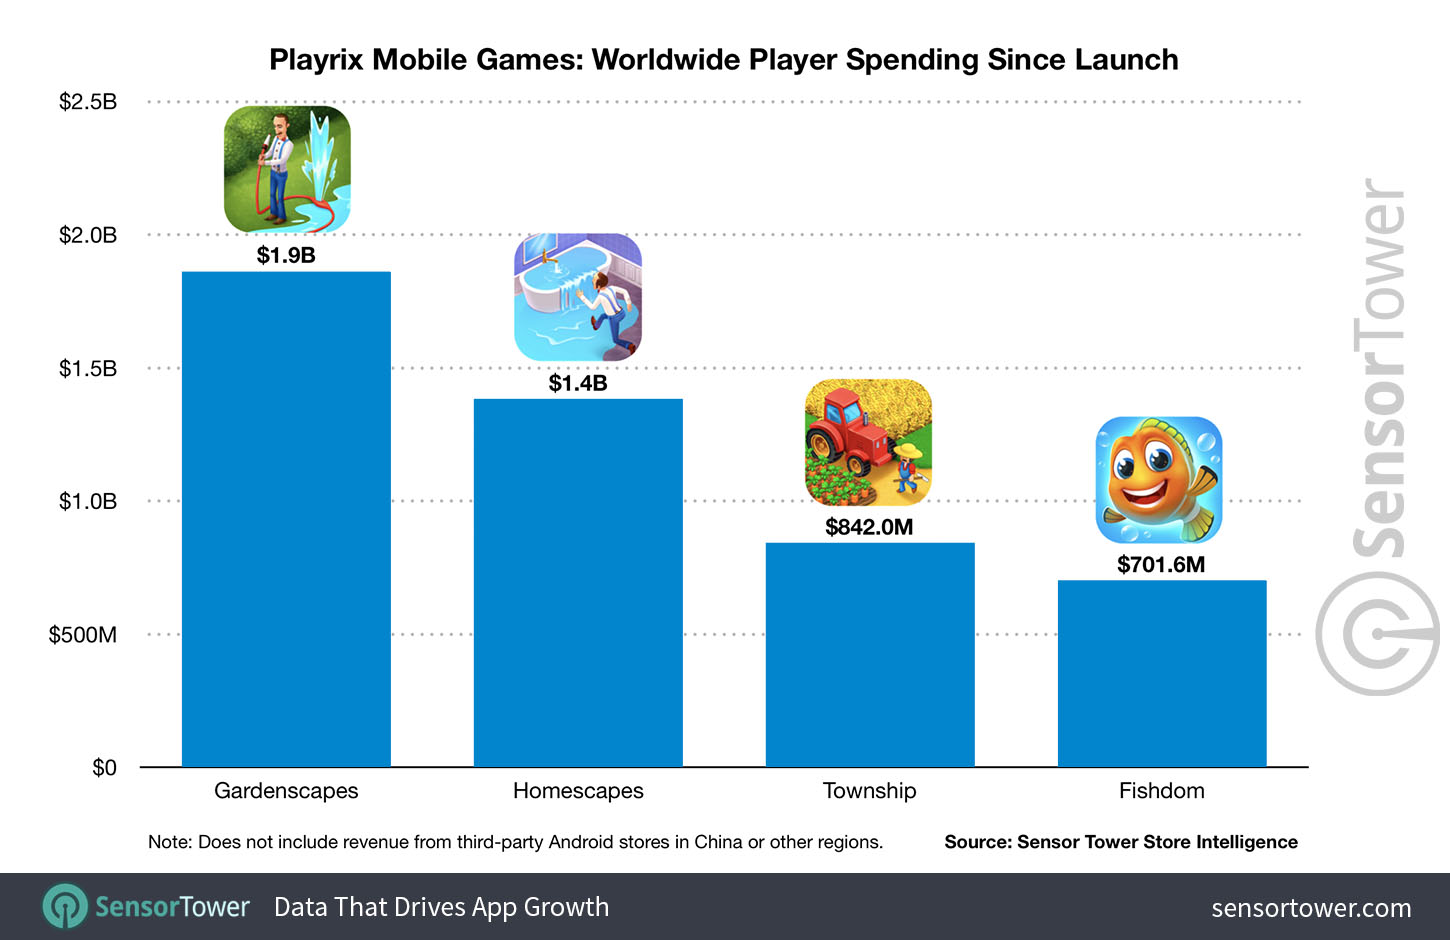 Playrix Mobile Games: Worldwide Player Spending Since Launch